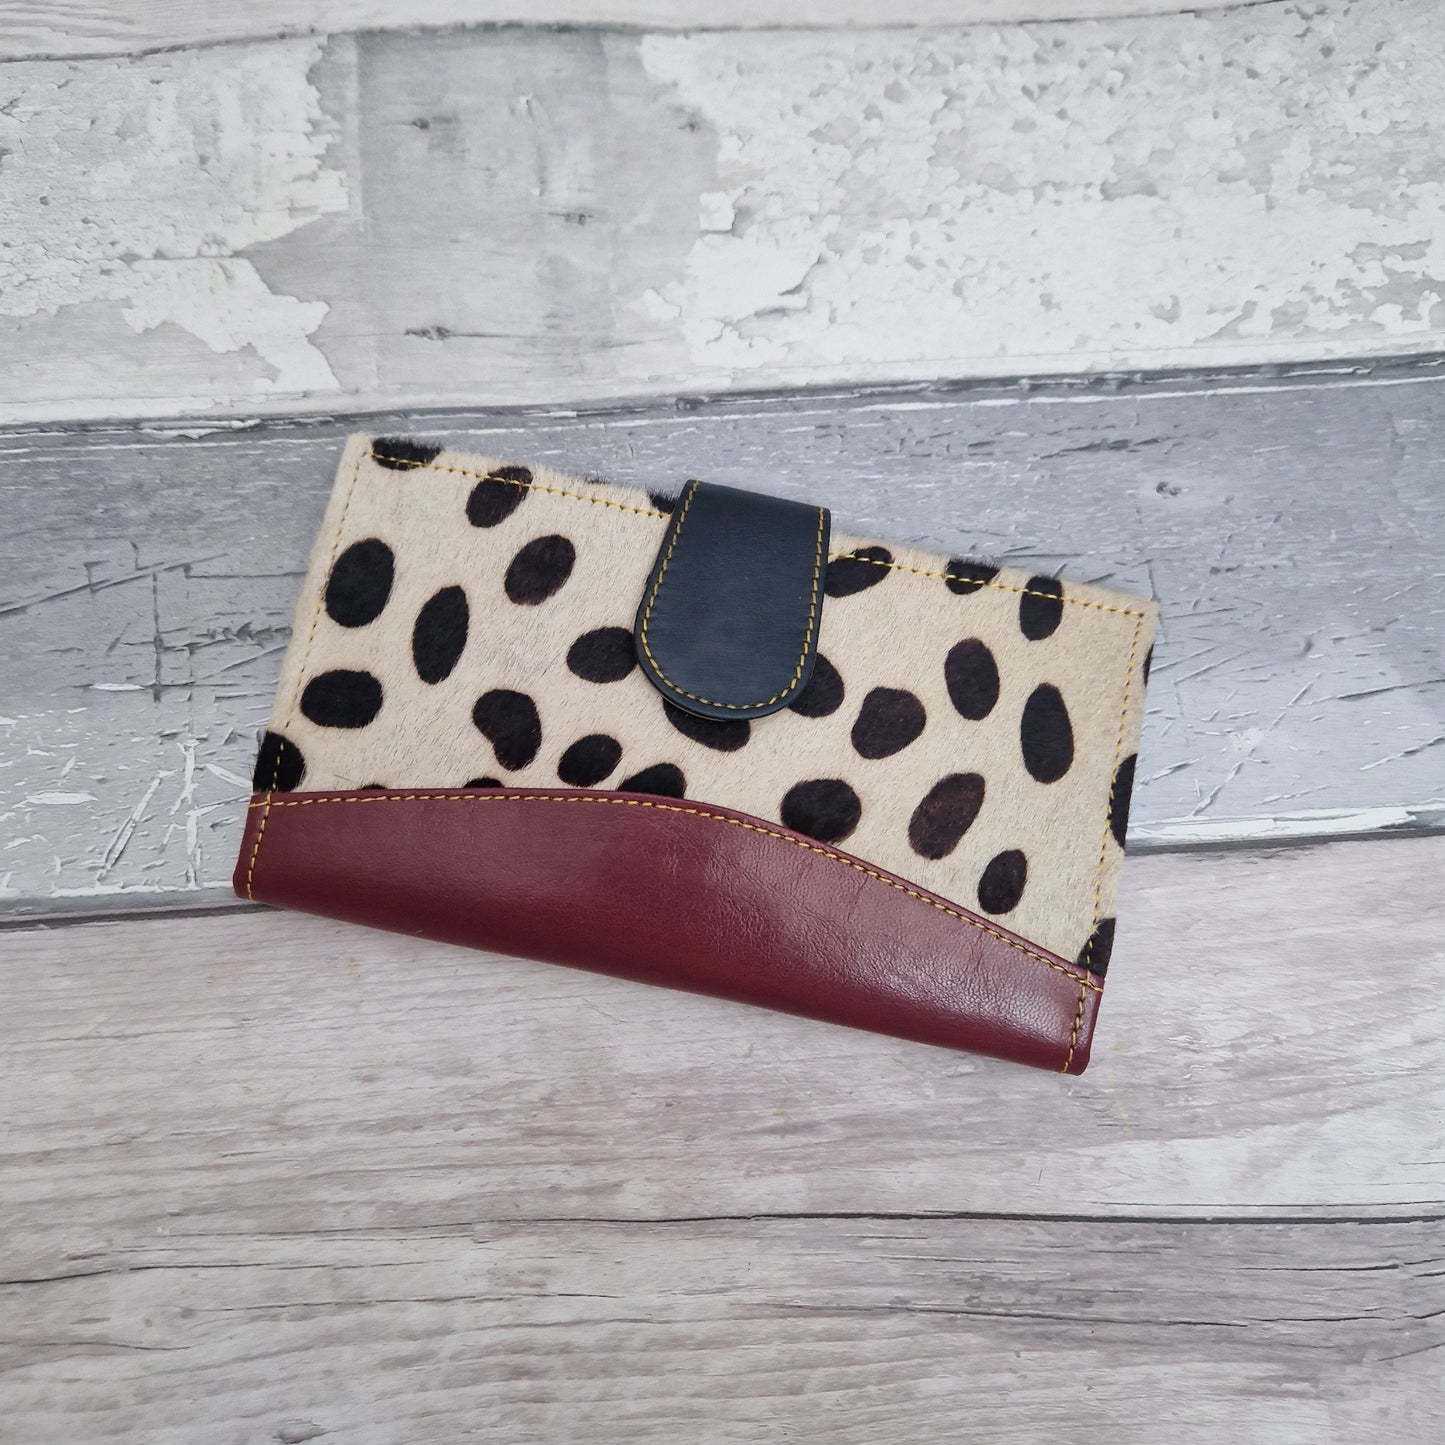 All leather purse with a spot print finish.